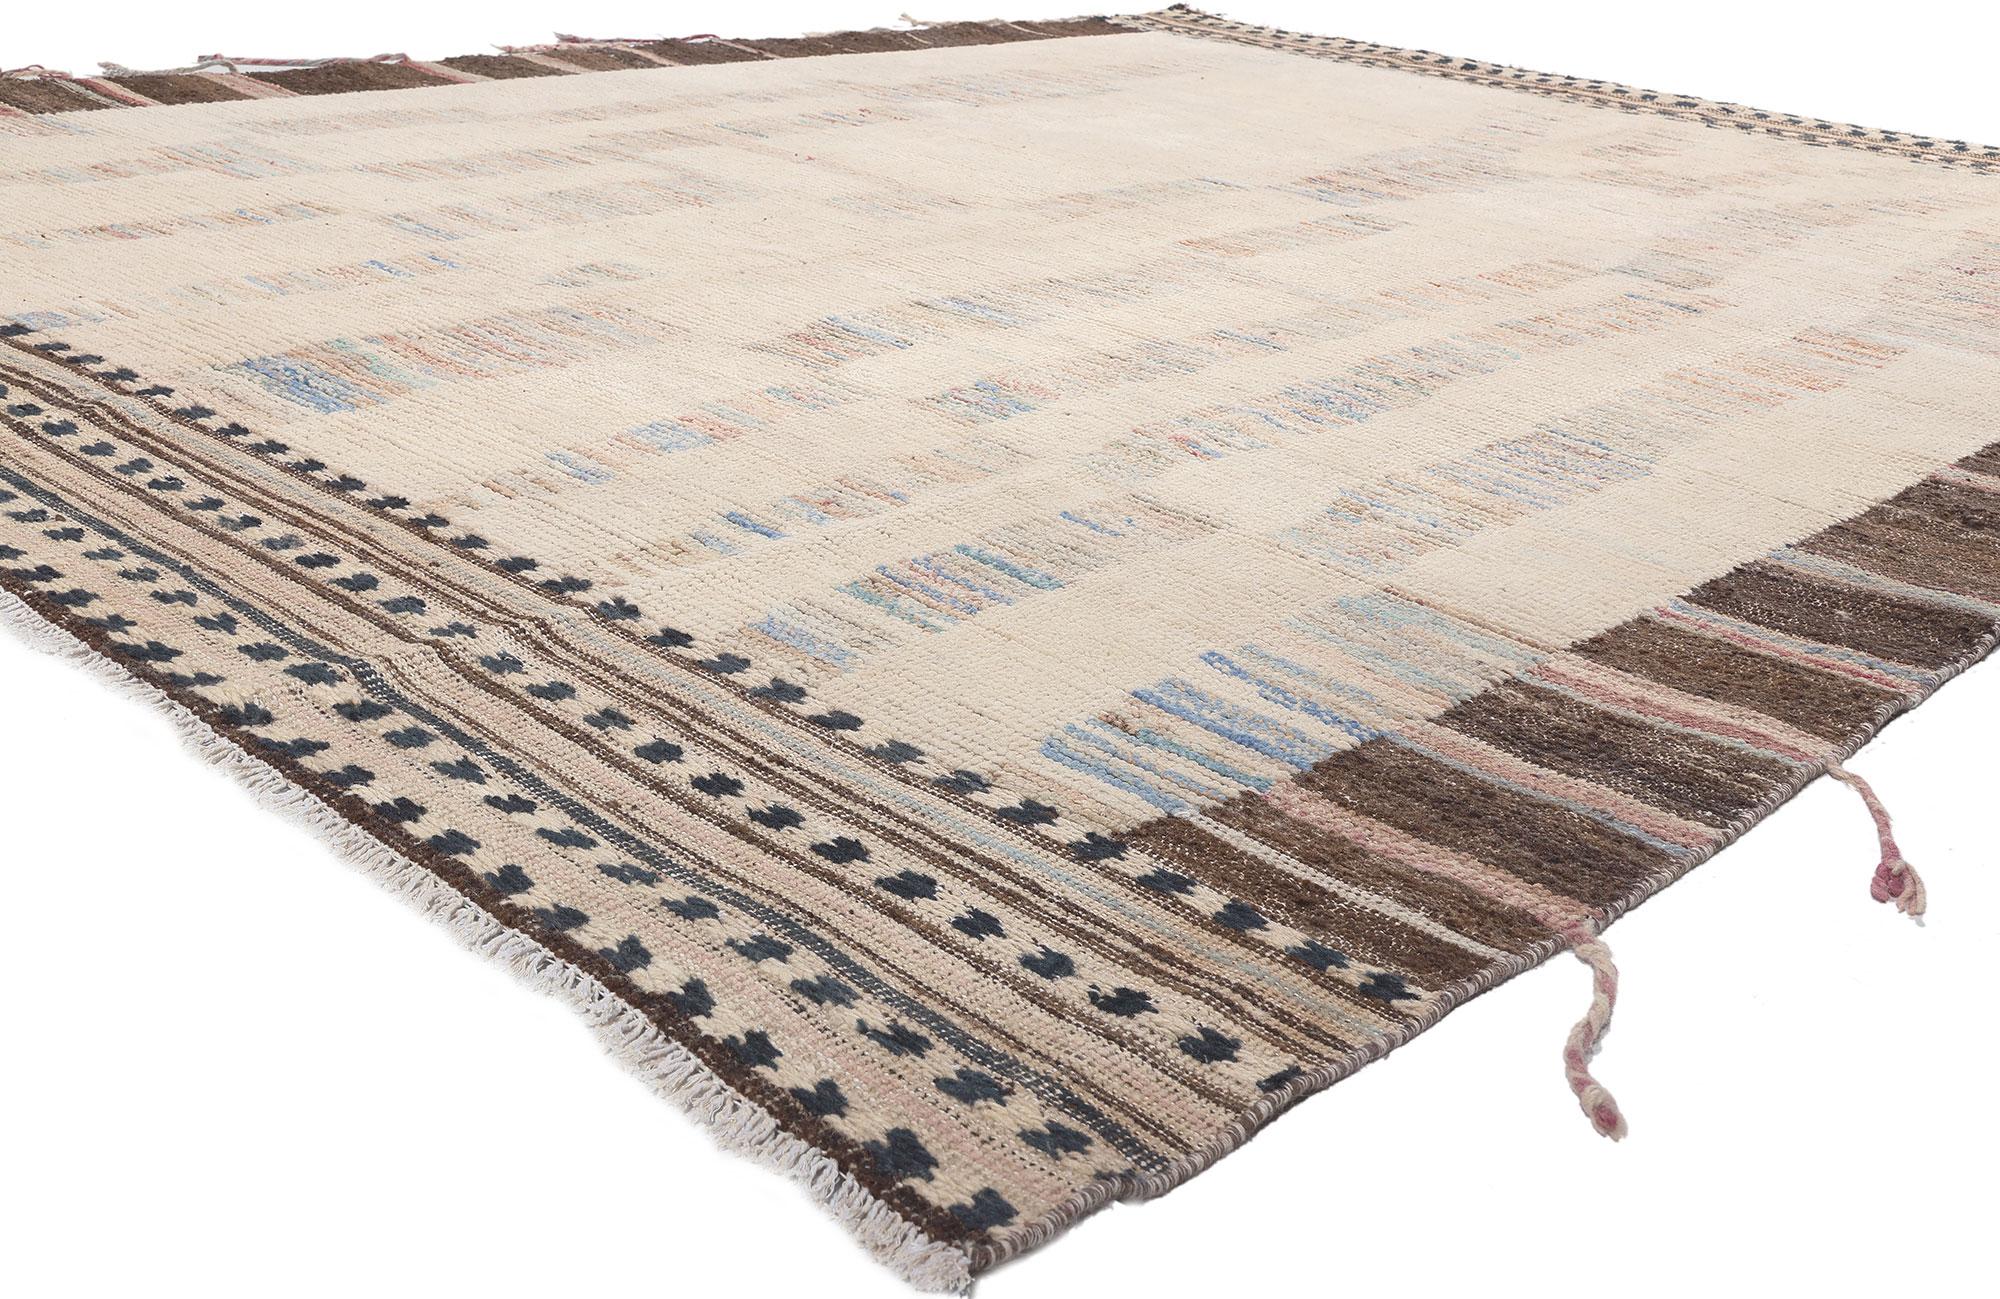 81008 Modern Moroccan Rug with Soft Earth-Tone Colors, 09'00 x 11'07. Emanating nomadic charm with incredible detail and texture, this modern Moroccan area rug will take on a curated lived-in look that feels timeless while imparting a sense of